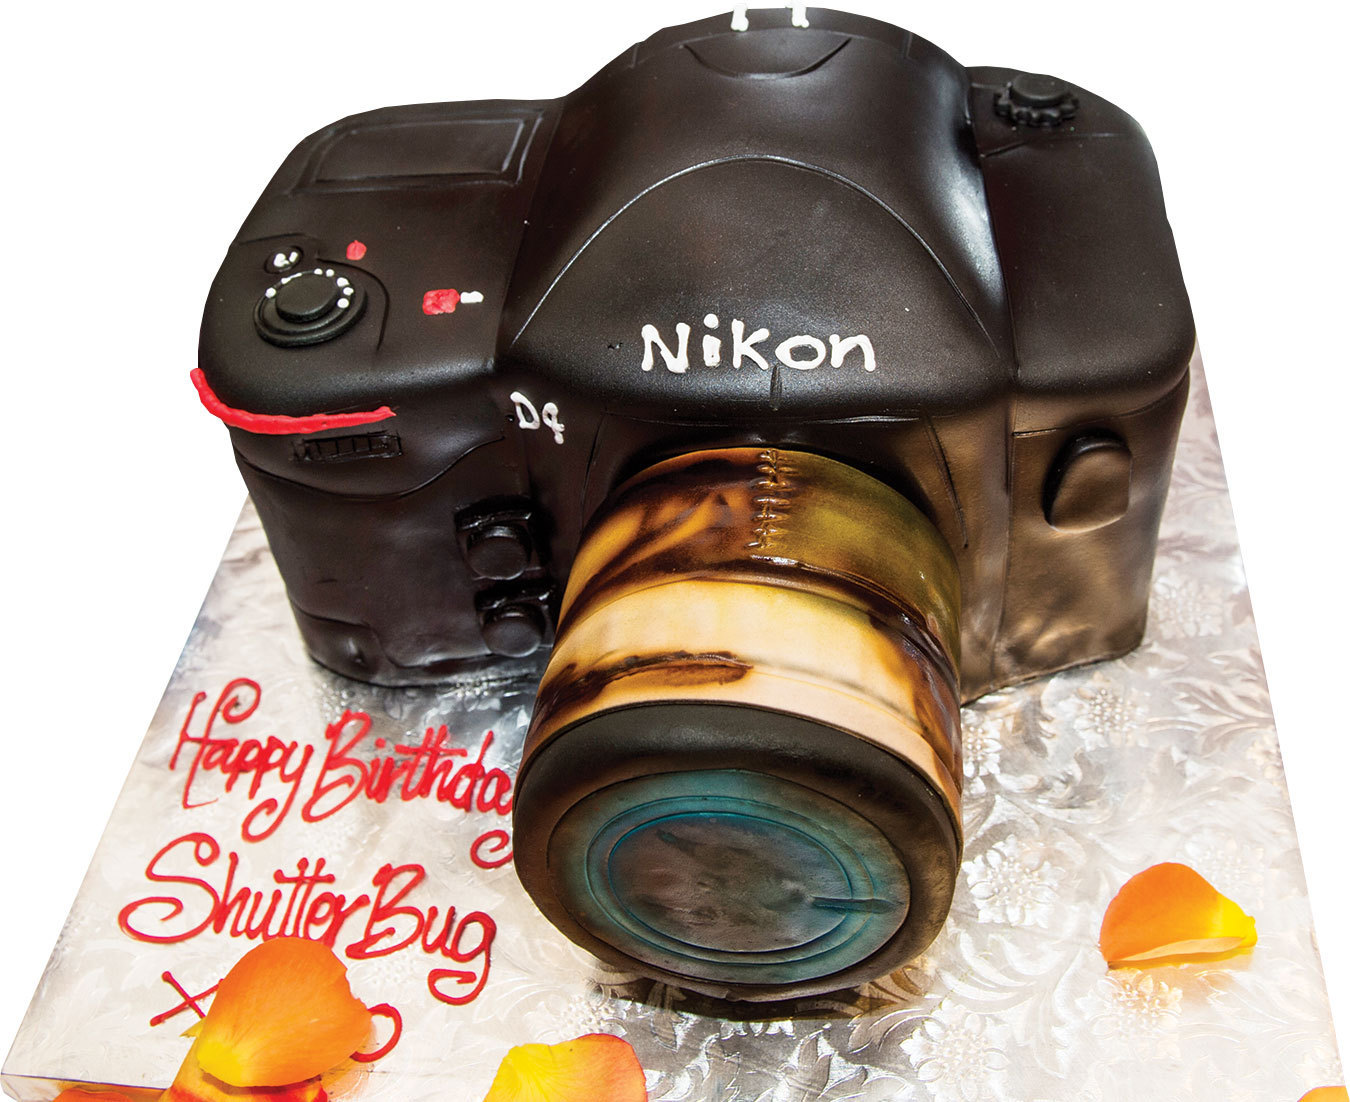 Cliff Roles’ Nikon rendered in white layer cake with raspberry buttercream filling and chocolate icing. Photo by Cliff Roles.